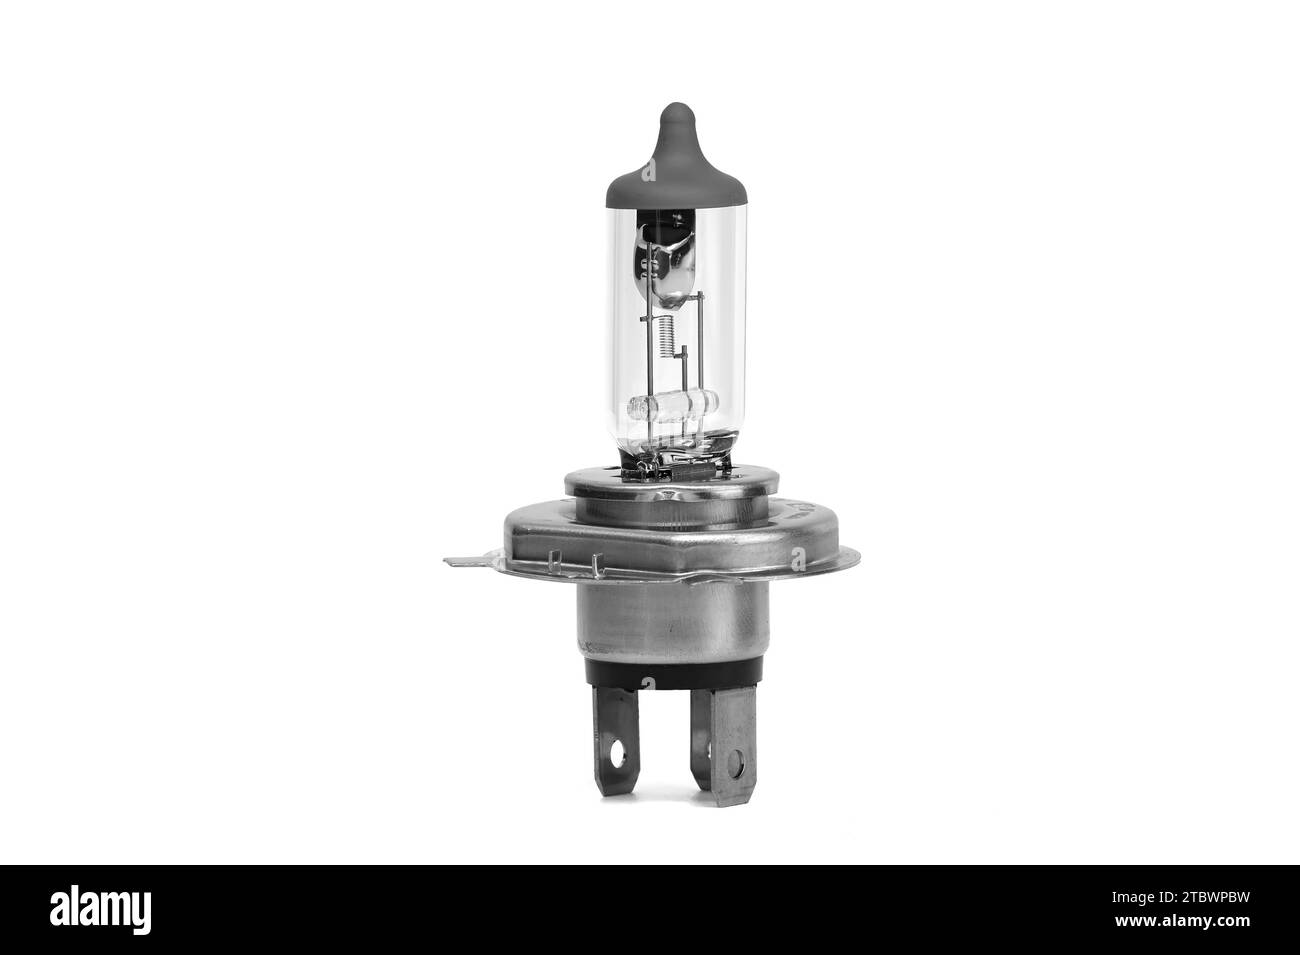 H4 halogen lamp bulb isolated on white background, vehicles parts and replacement Stock Photo